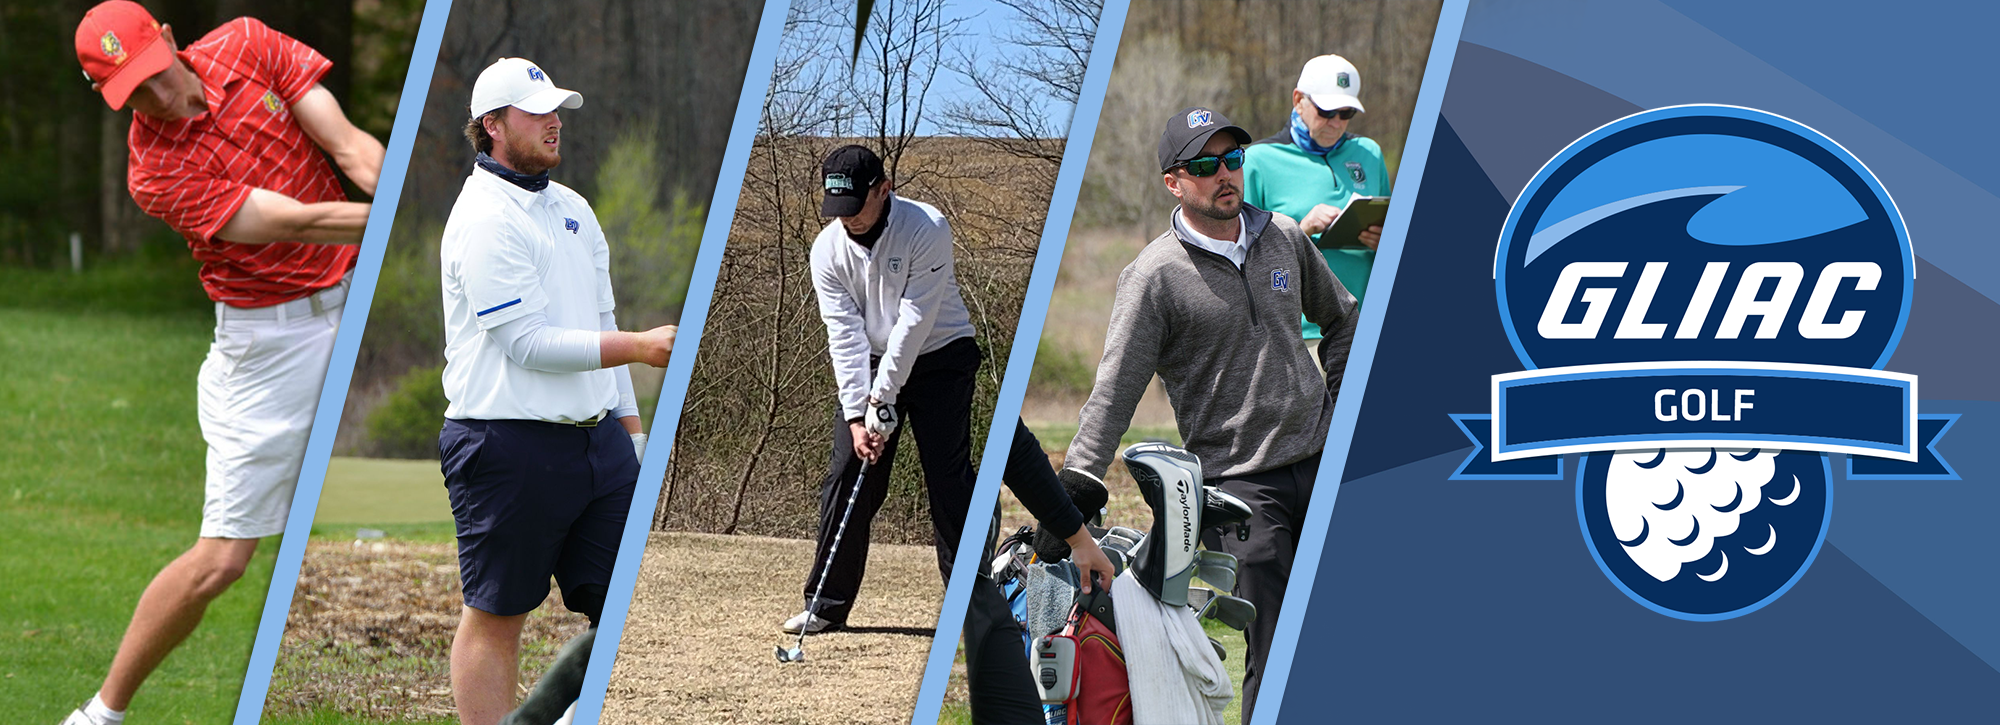 FSU's Hursey Captures GLIAC Men's Golf Player of the Year Honors; All-Conference Teams Revealed